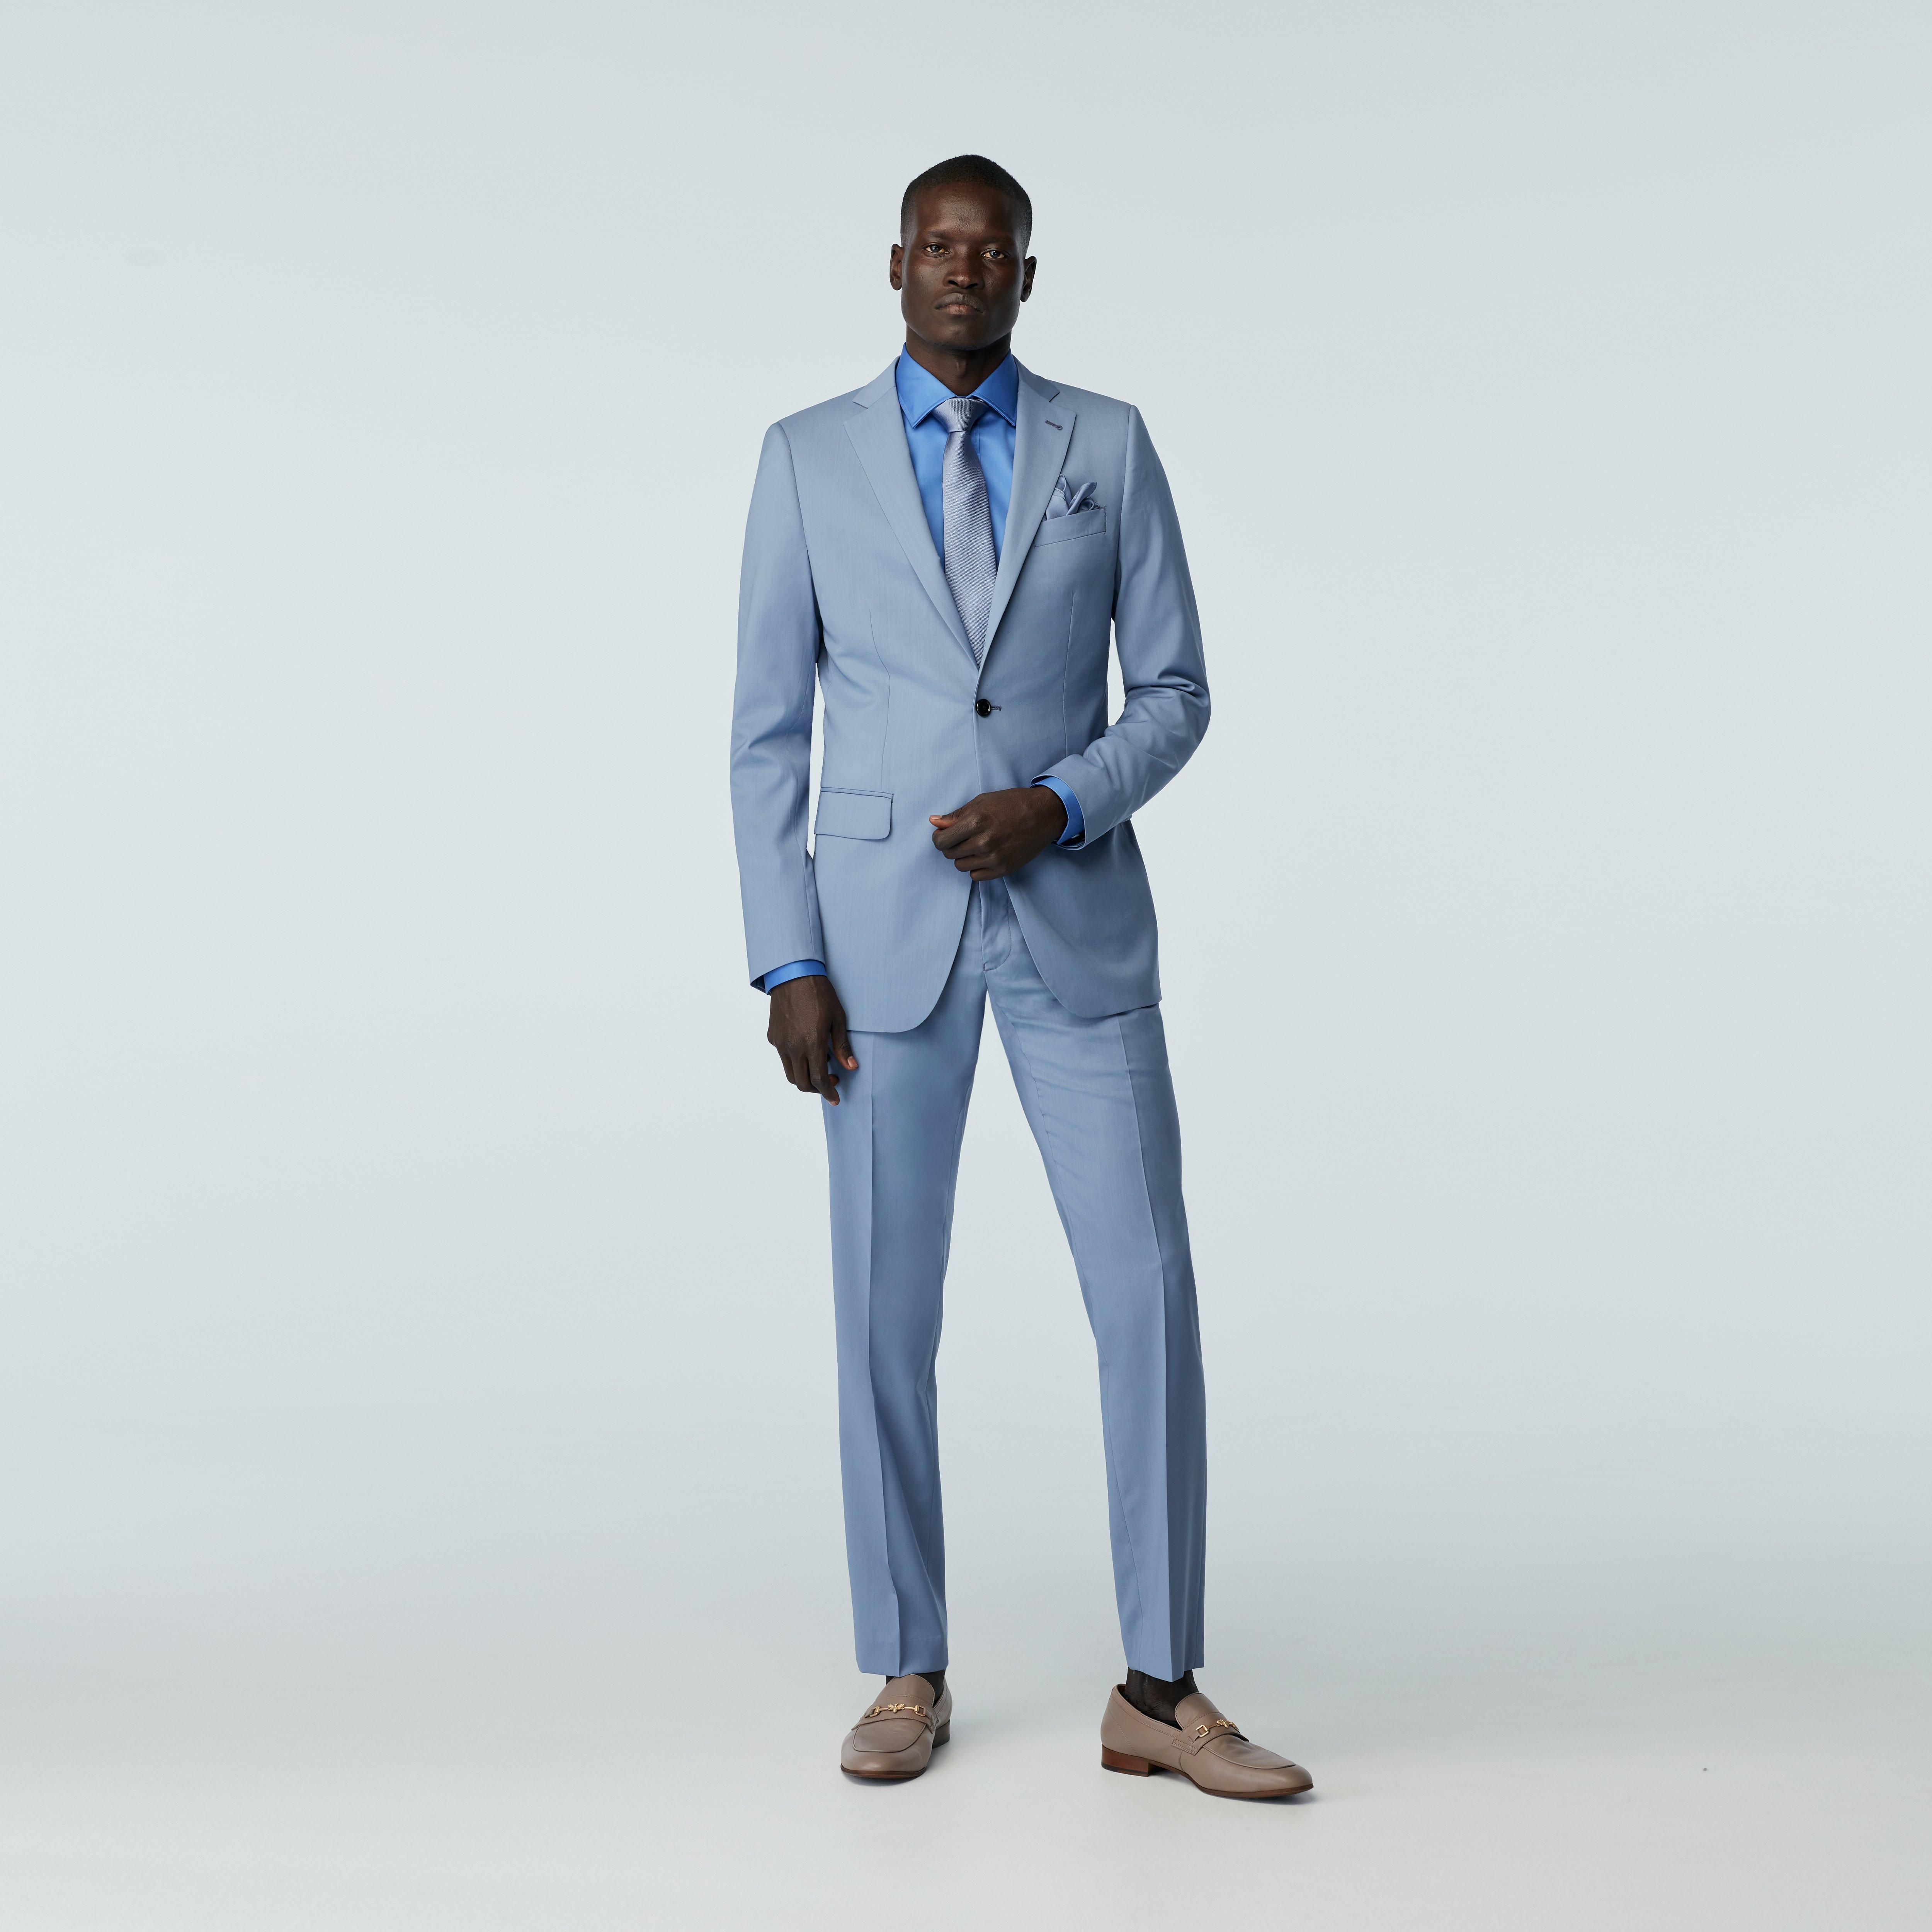 Blue Suit Fashion: Styling Tips and Ideas